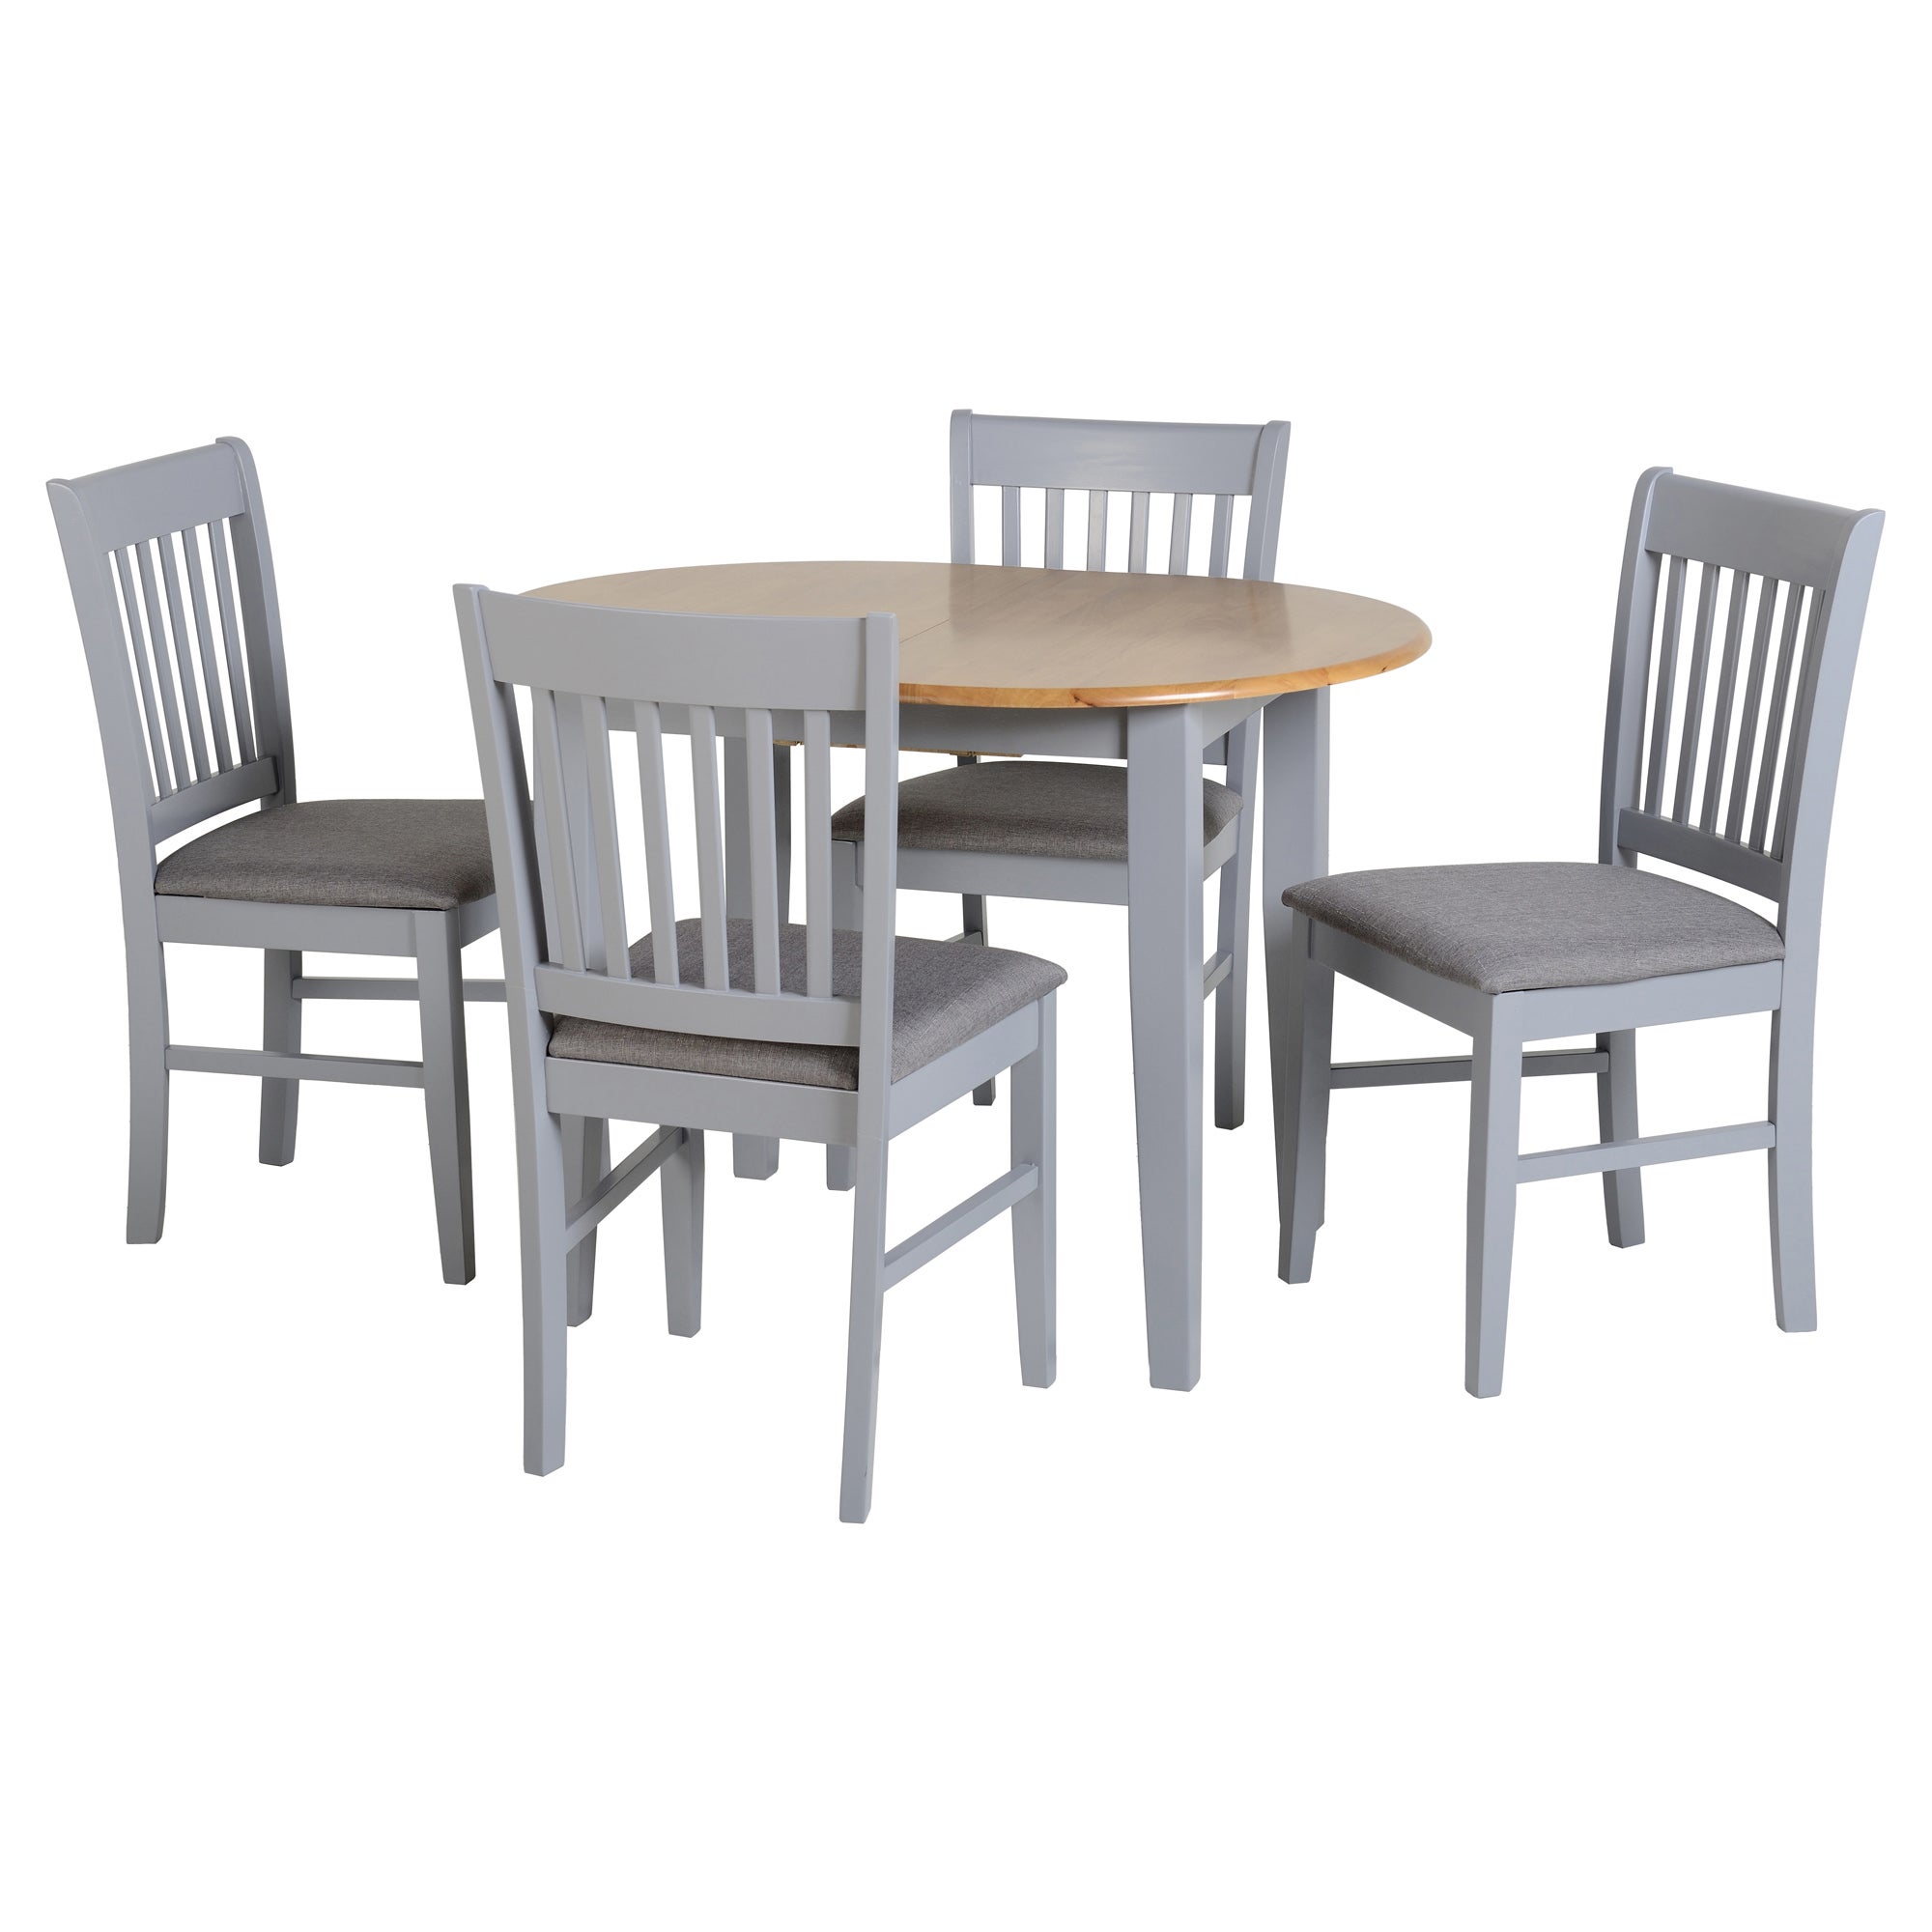 Oxford Oval Extendable Dining Table with 4 Chairs, Grey